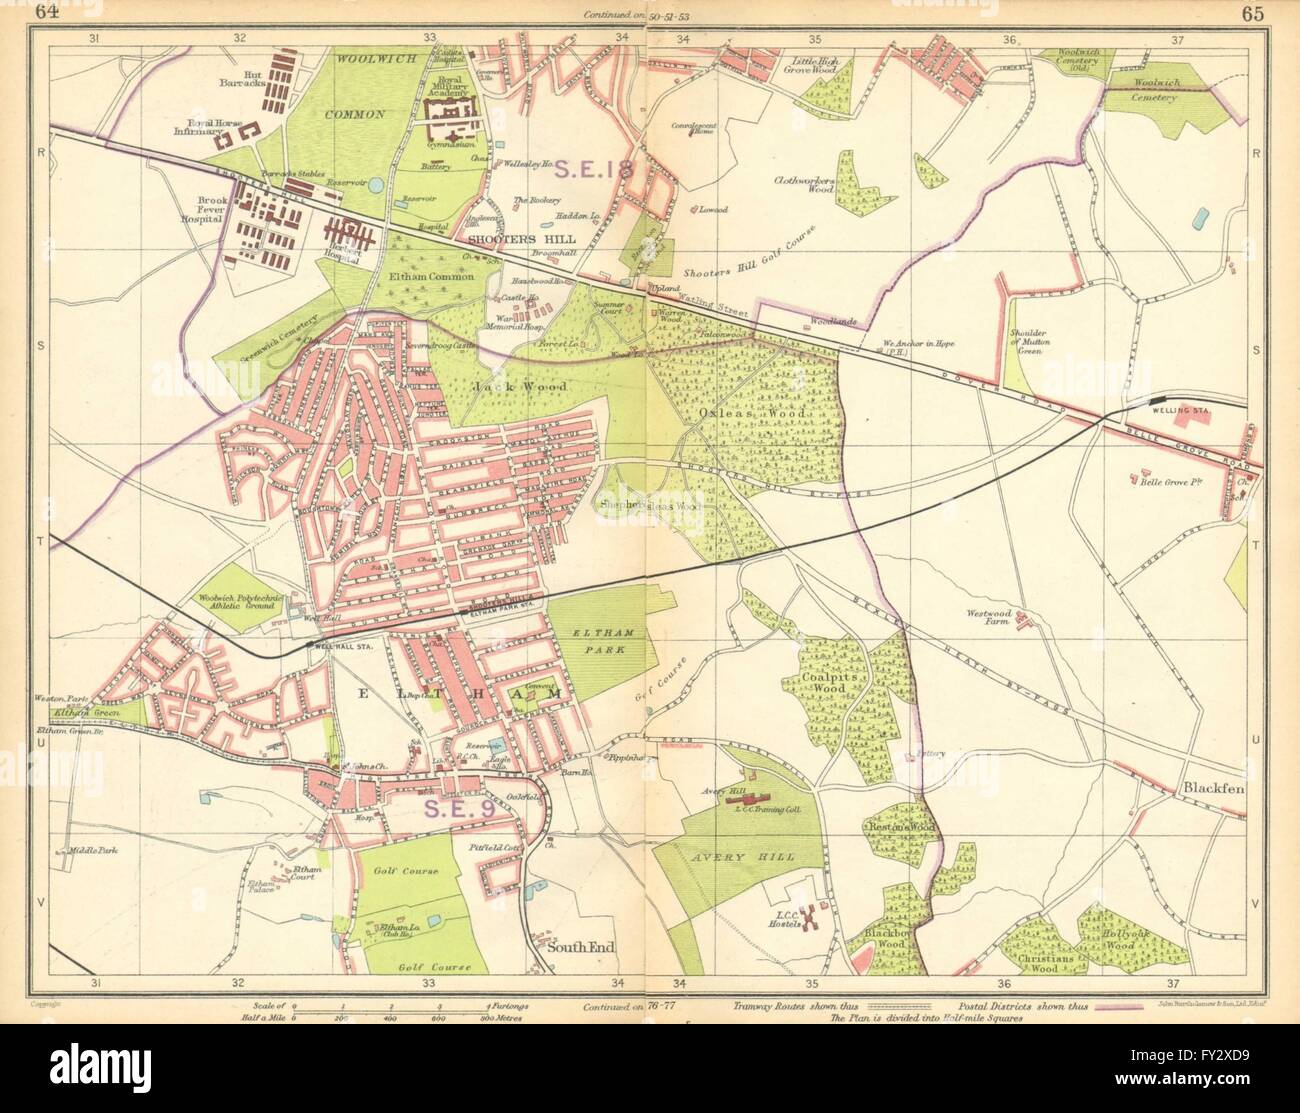 Londres SE : Beauraing Shooters Hill South End Welling Blackfen Avery Hill, 1925 map Banque D'Images